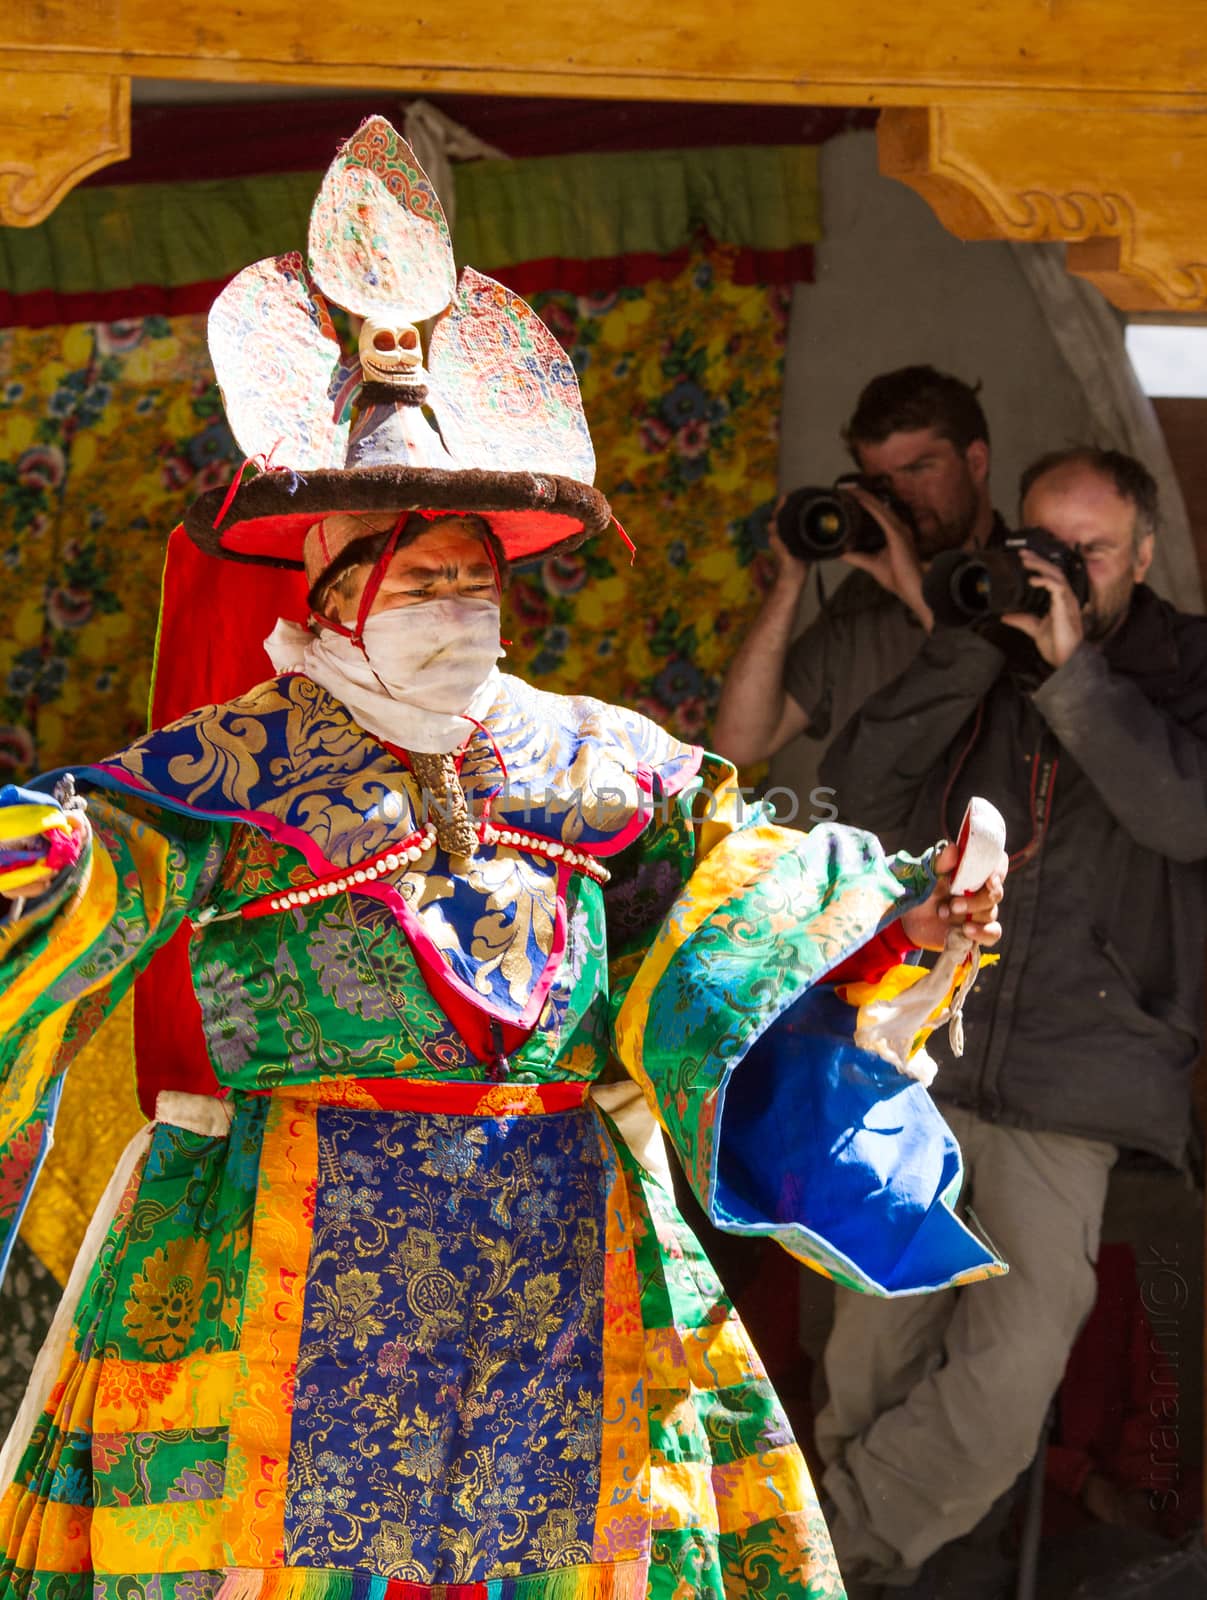 Lama performs a religious masked and costumed mystery black hat dance of Tibetan Buddhism during the Cham Dance Festival, with two photographers on the background in Kursha monastery by straannick